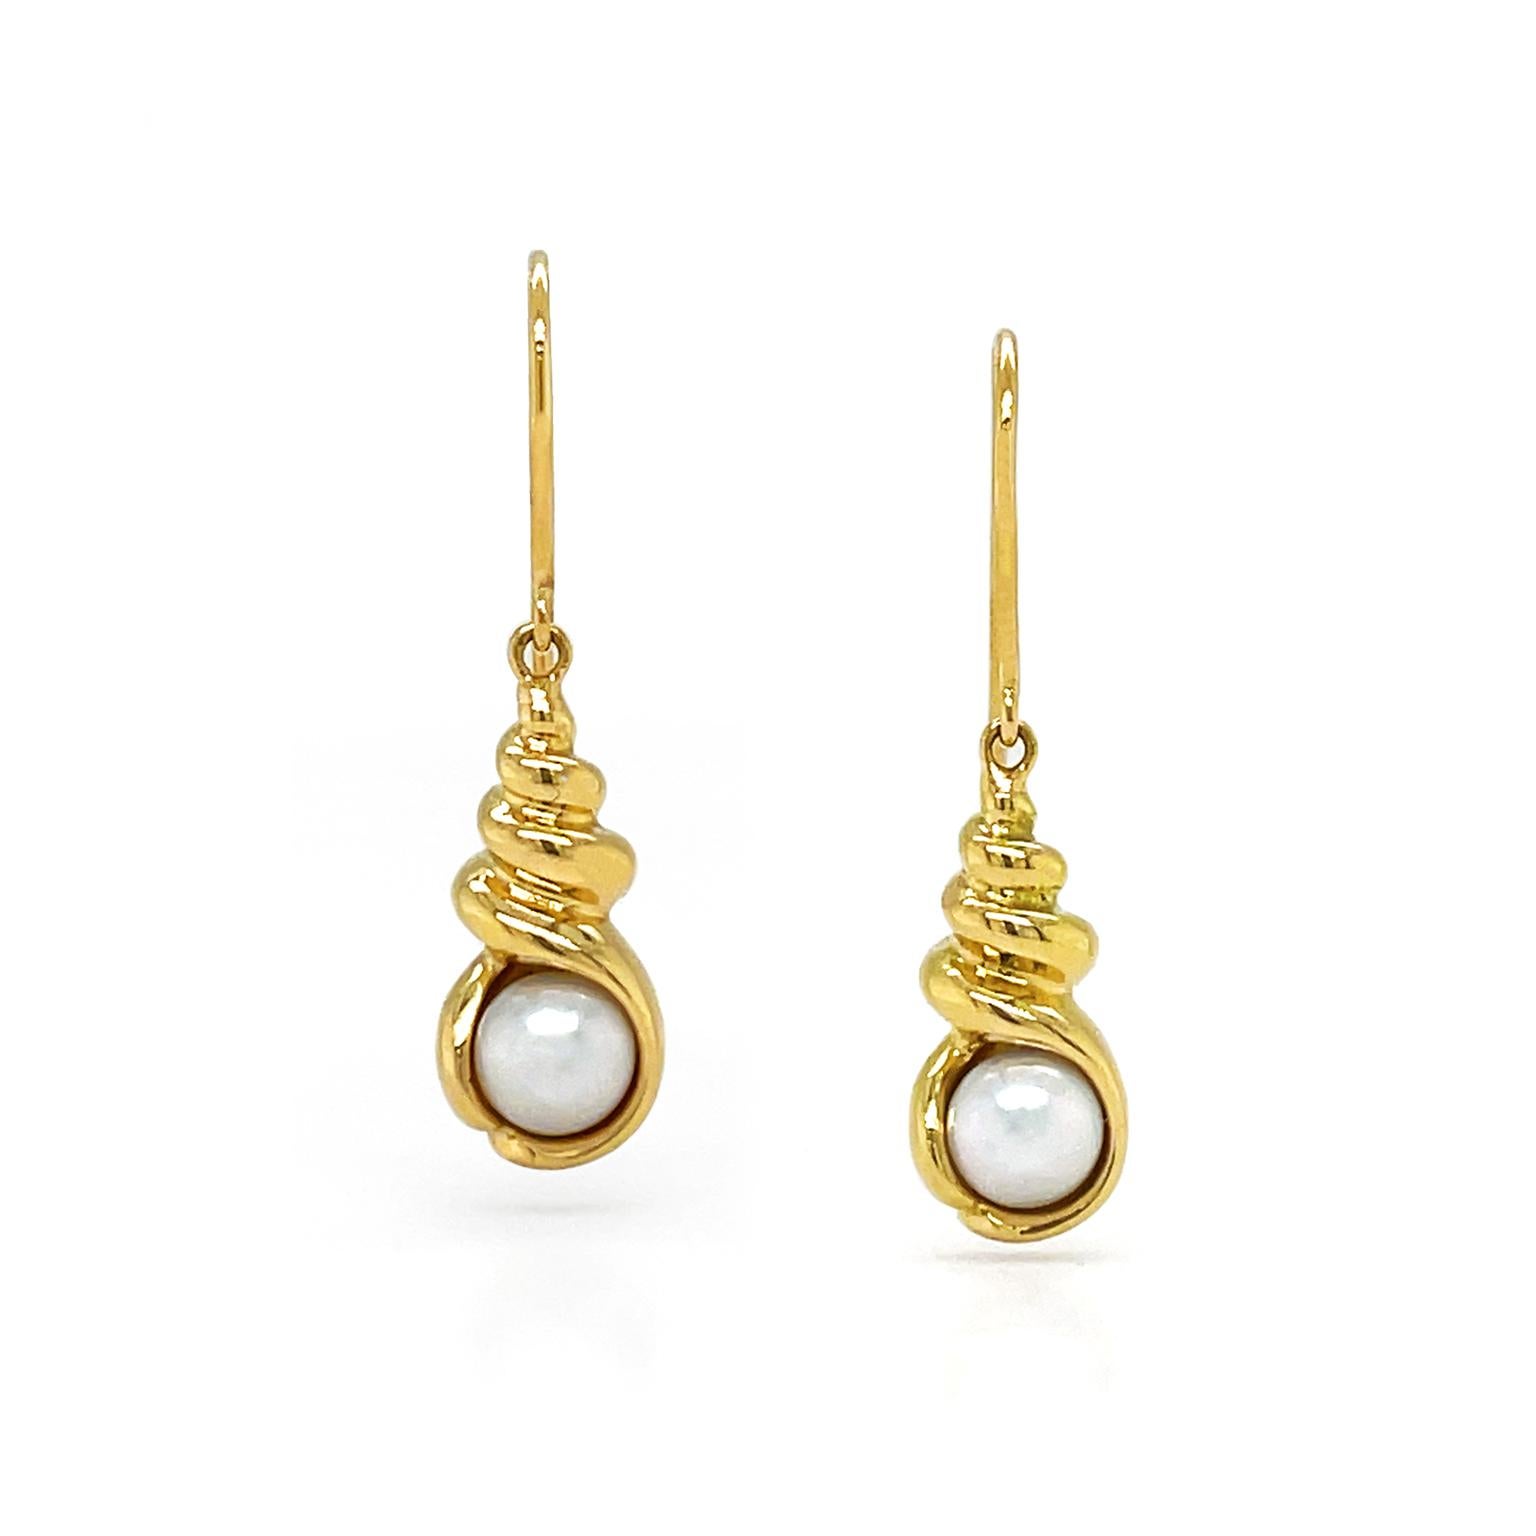 18k yellow gold creates an aquatic aura as it forms a seashell. Descending from the French-wire hooks is a spire-topped shell with an open round base with an Akoya pearl nesting inside. Craftsmanship includes ridges on the spire for depth and